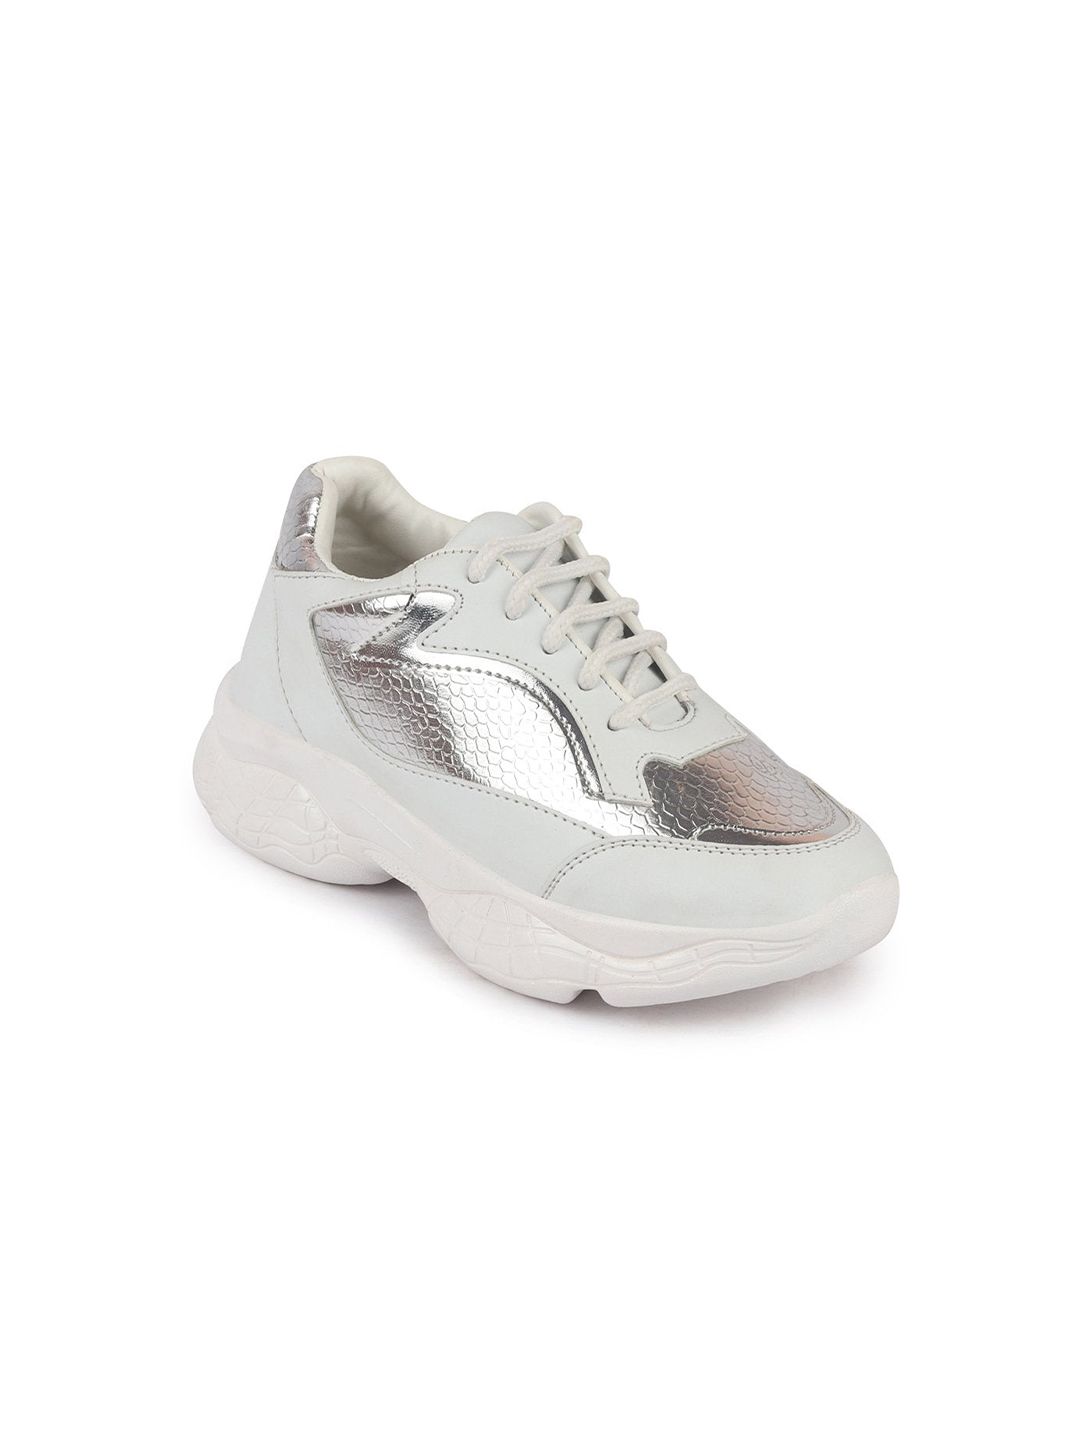 FAUSTO Women White Running Non-Marking Shoes Price in India